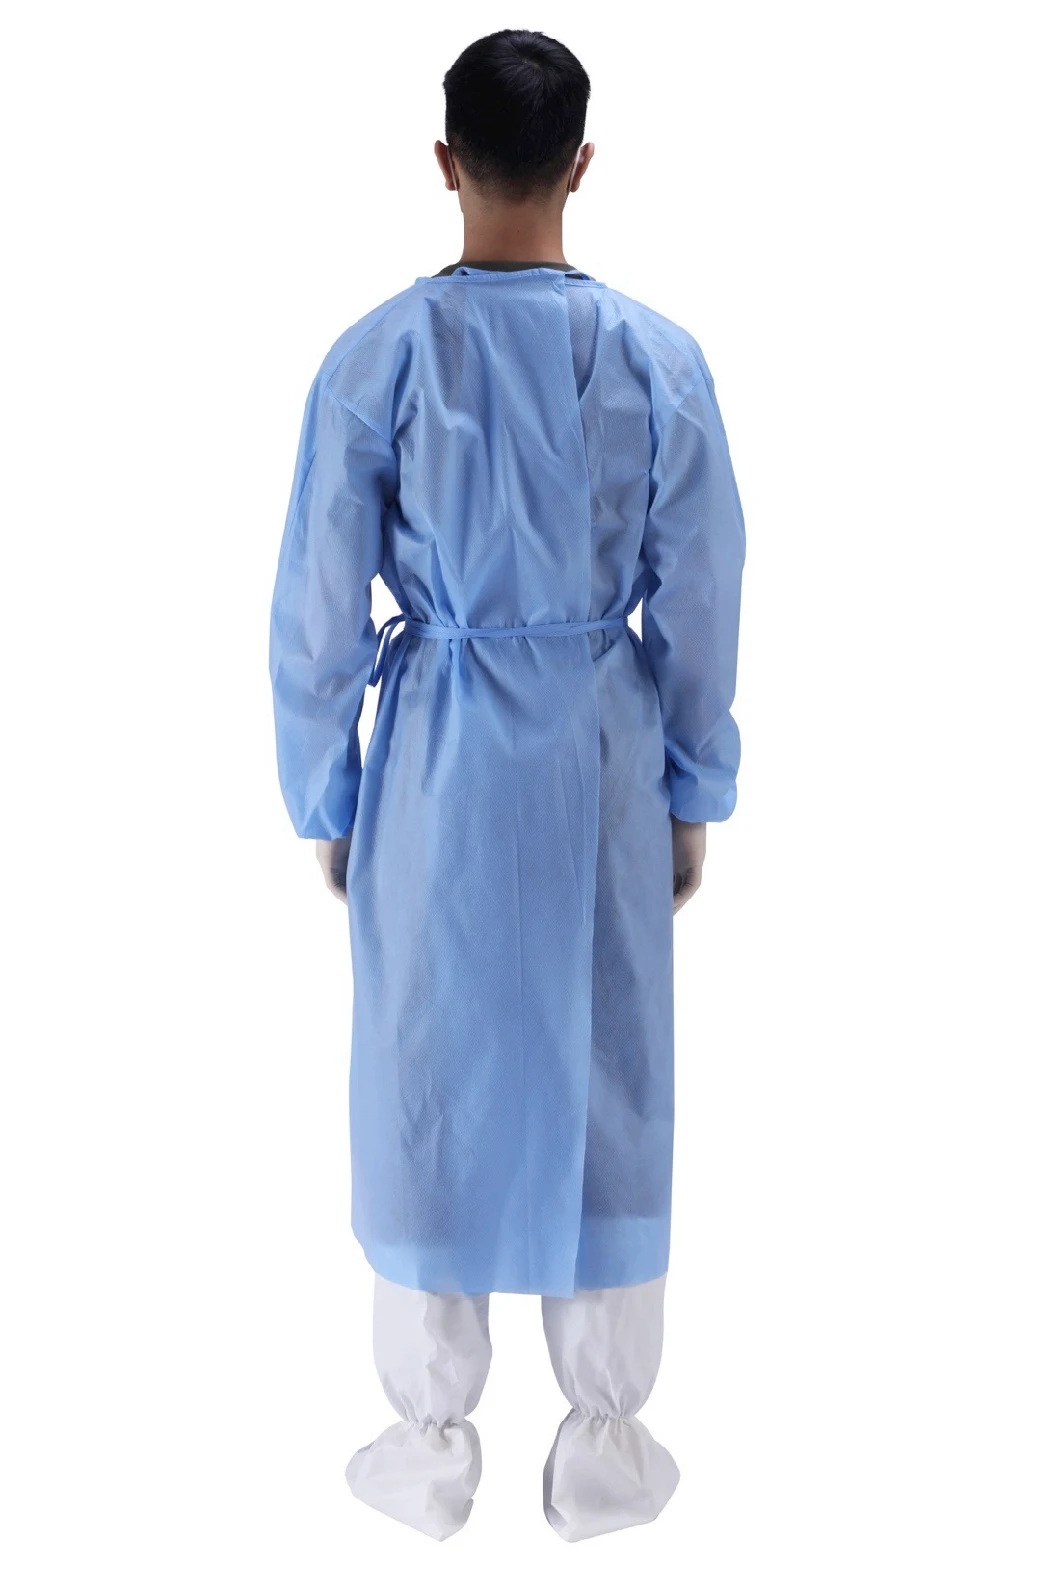 High Risk Reinforced Surgical Gown by Eo Sterilized